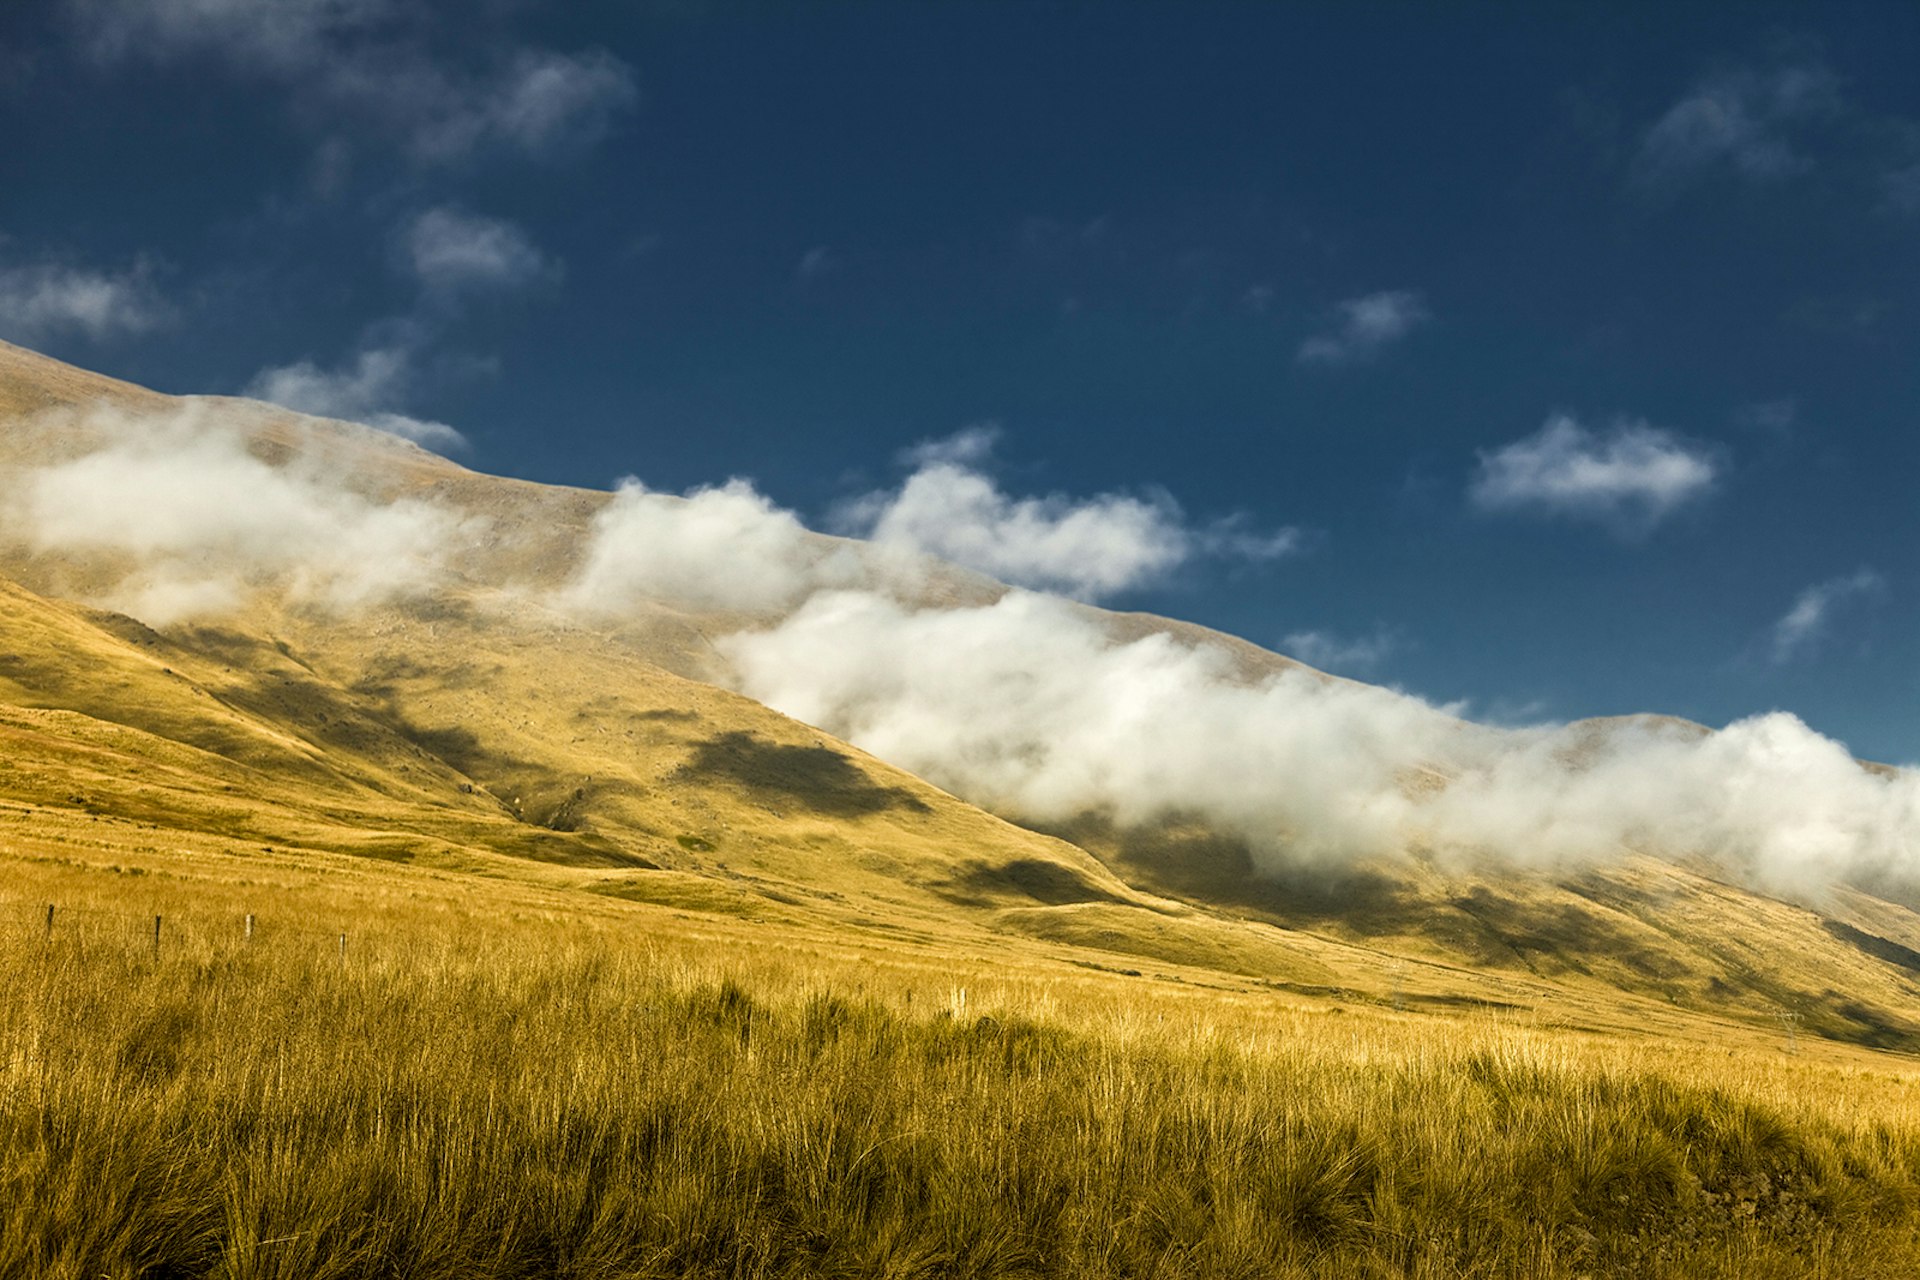 A grassy hillside with clouds against a blue sky in Argentina © Picturegarden / Getty Images